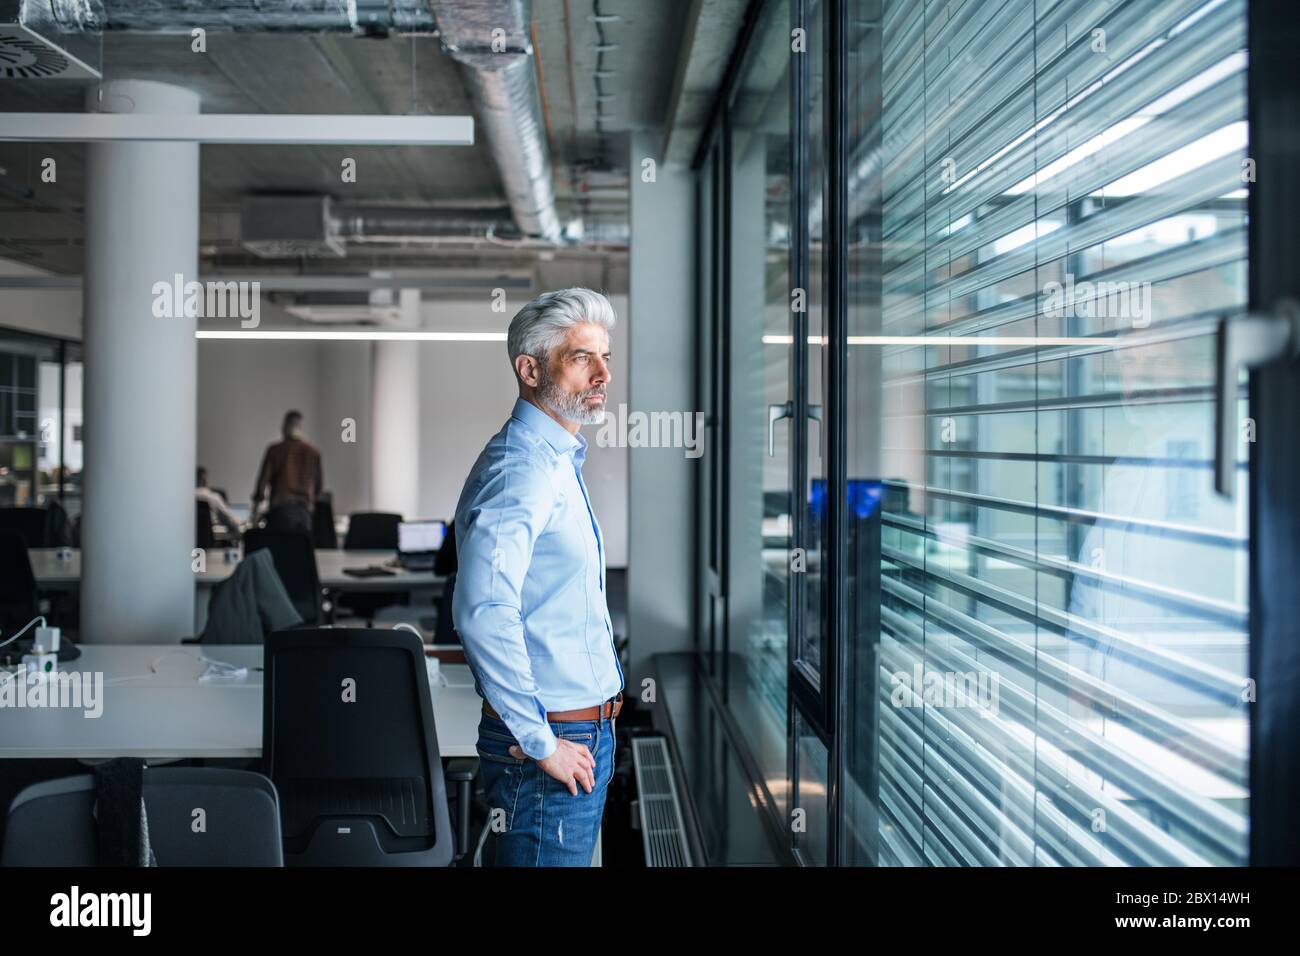 A mature businessman standing in an office, looking out of window. Stock Photo